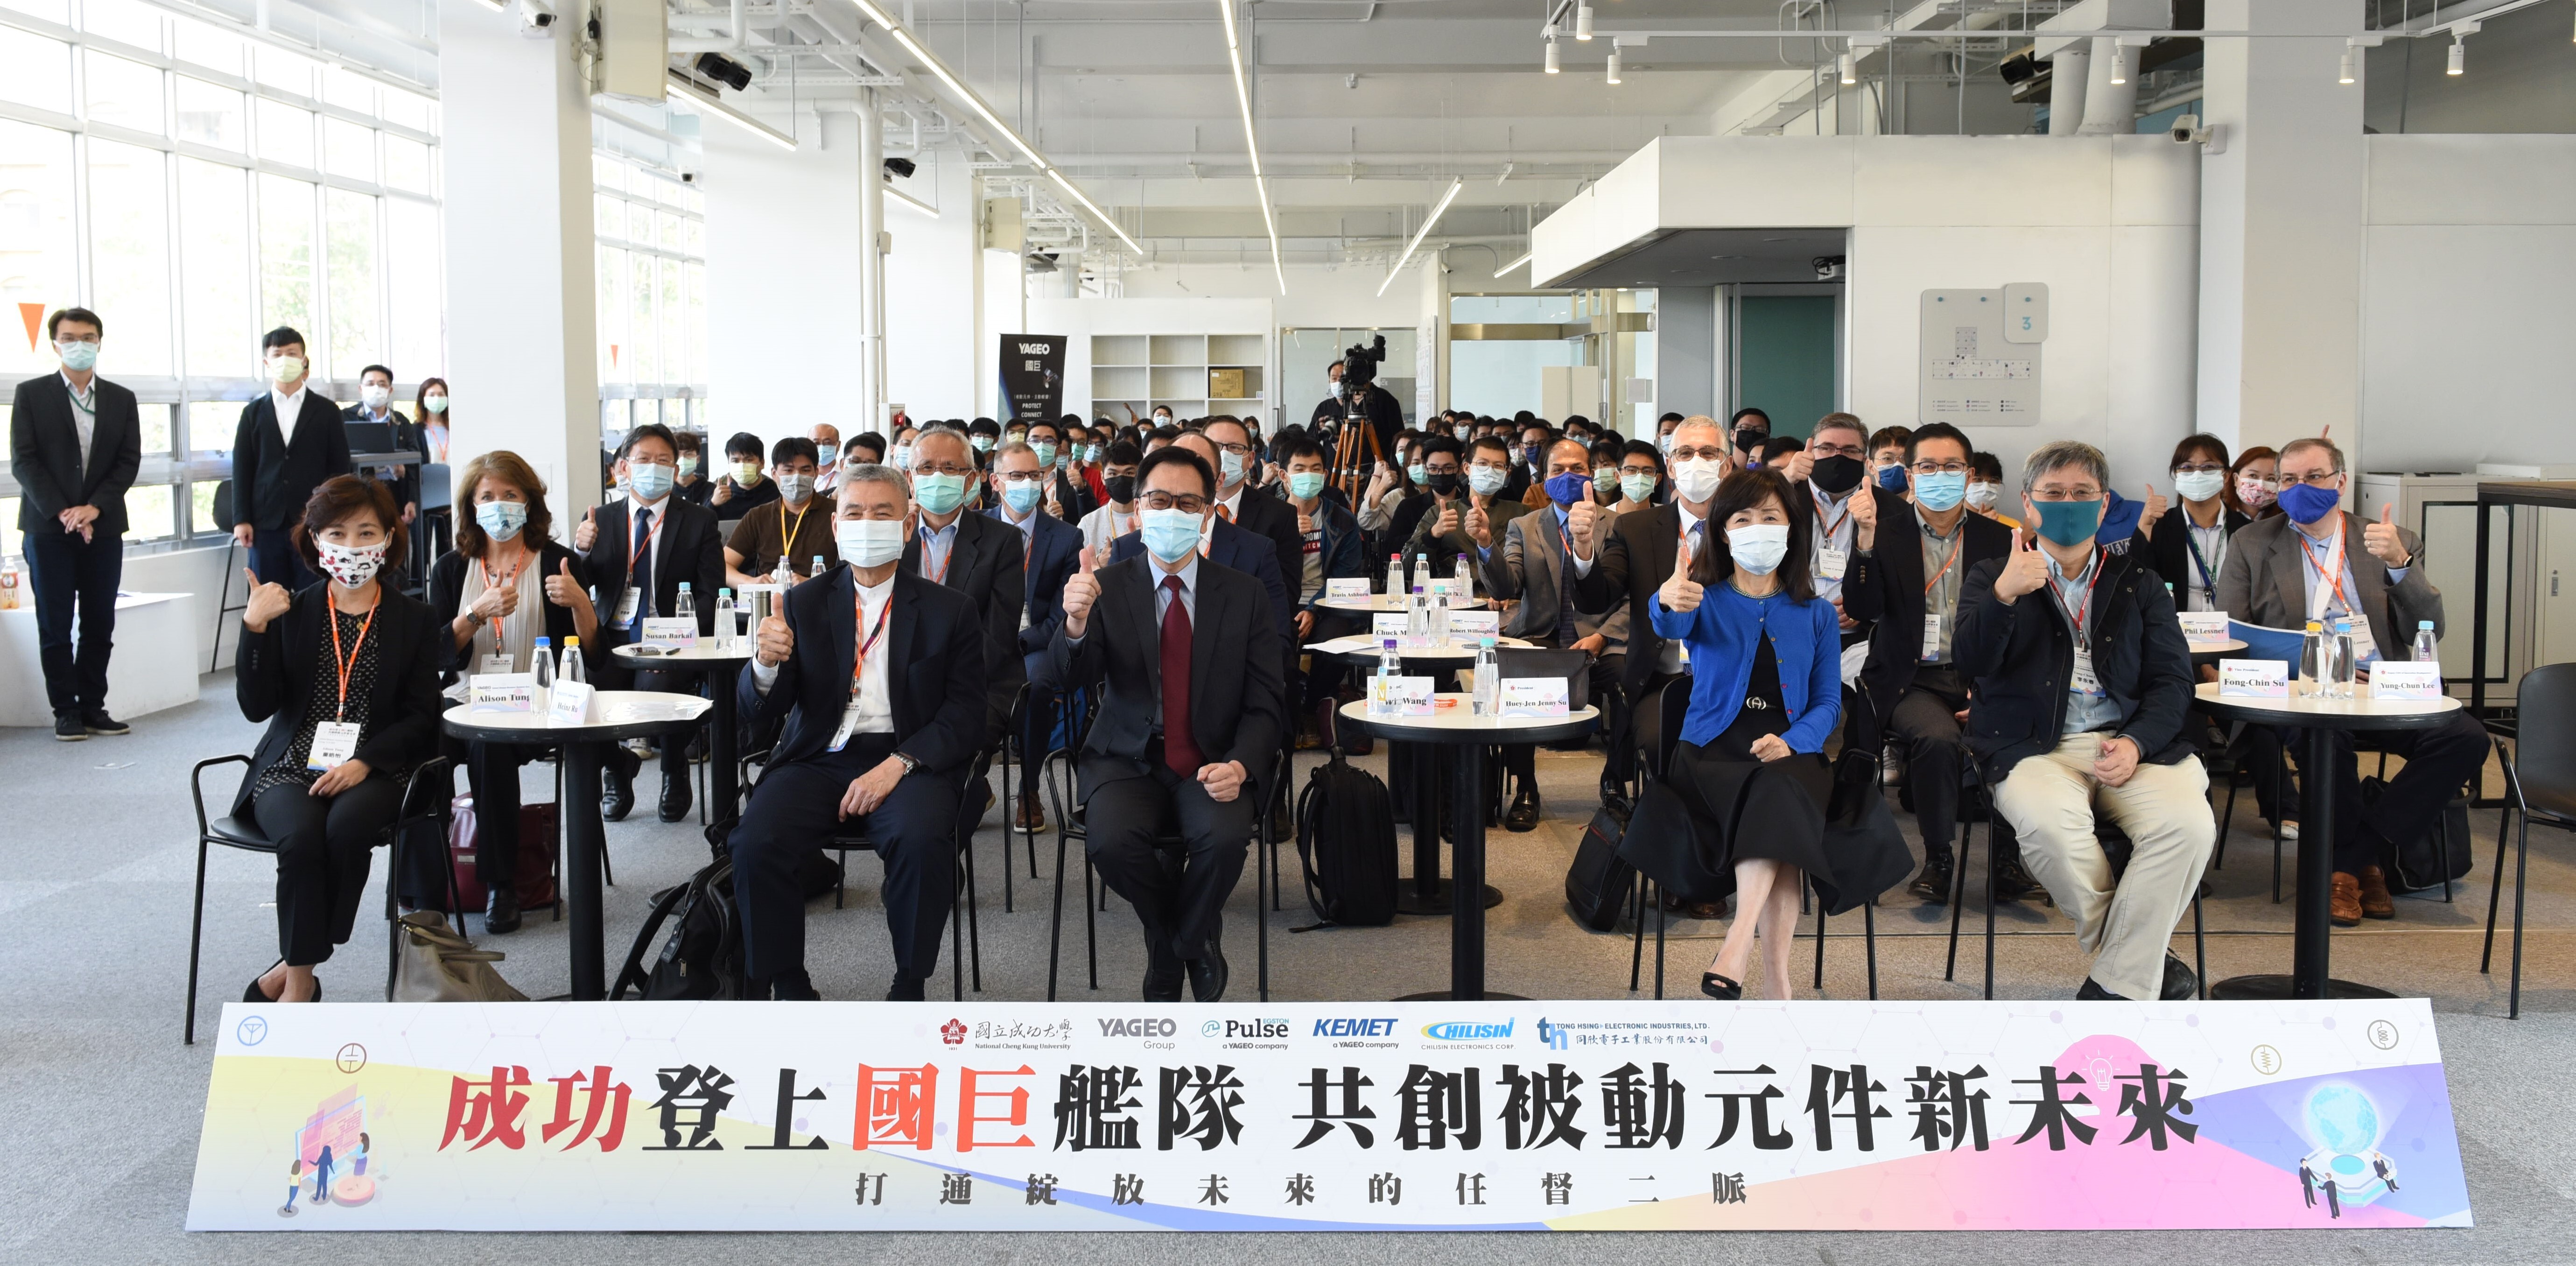 NCKU-Yageo Day attractes a full house of students.